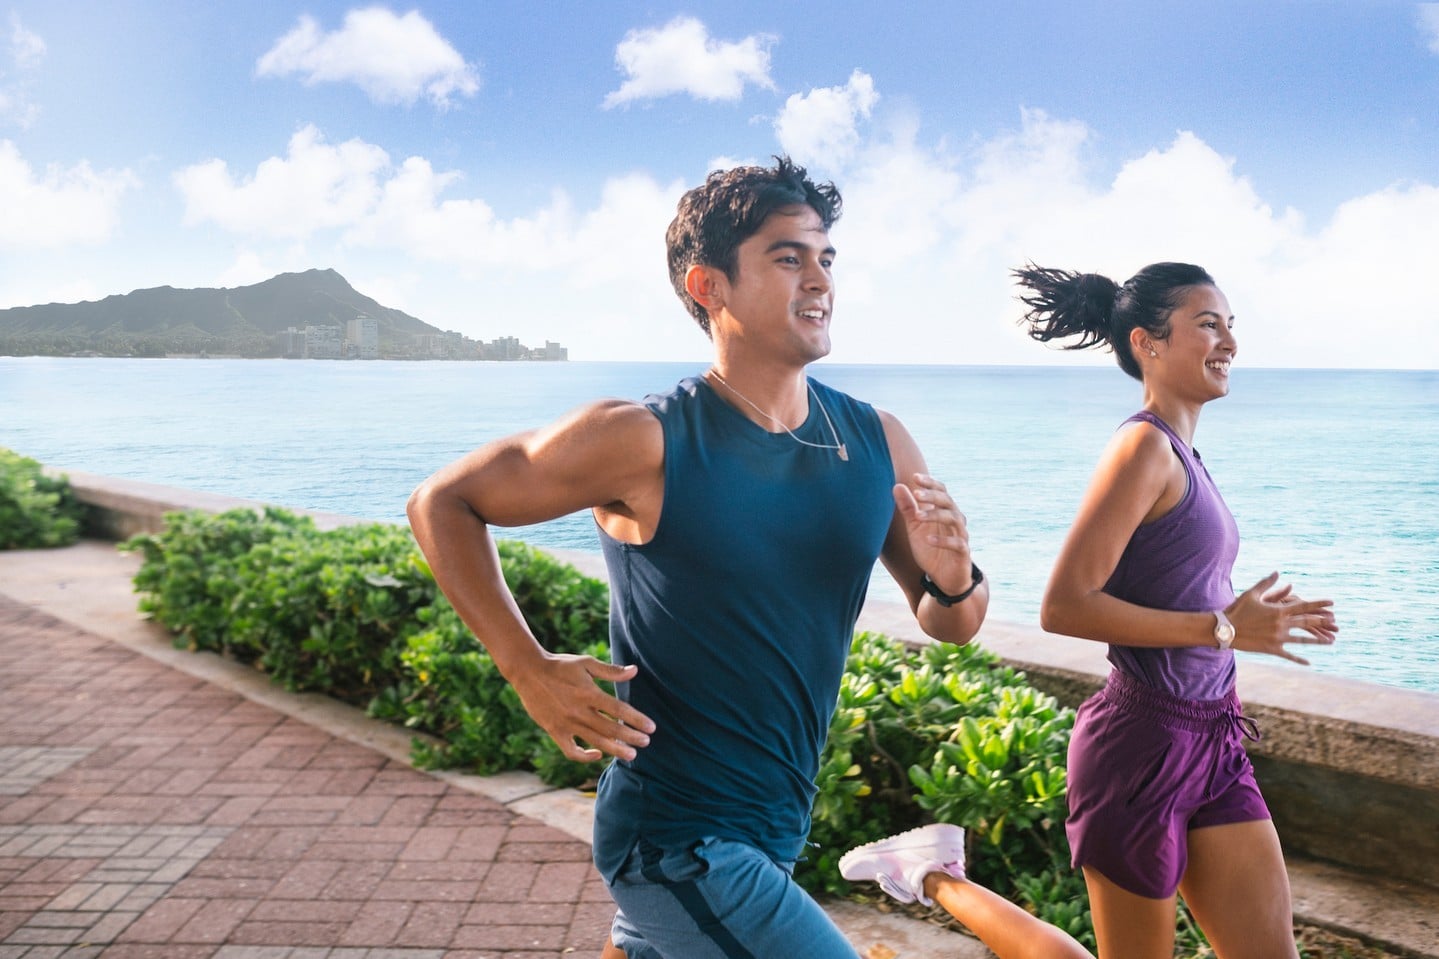 Kickstart your day with a new exercise routine. Whether you like to jog, swim or ride, we've got the perfect view for your morning fitness goals.